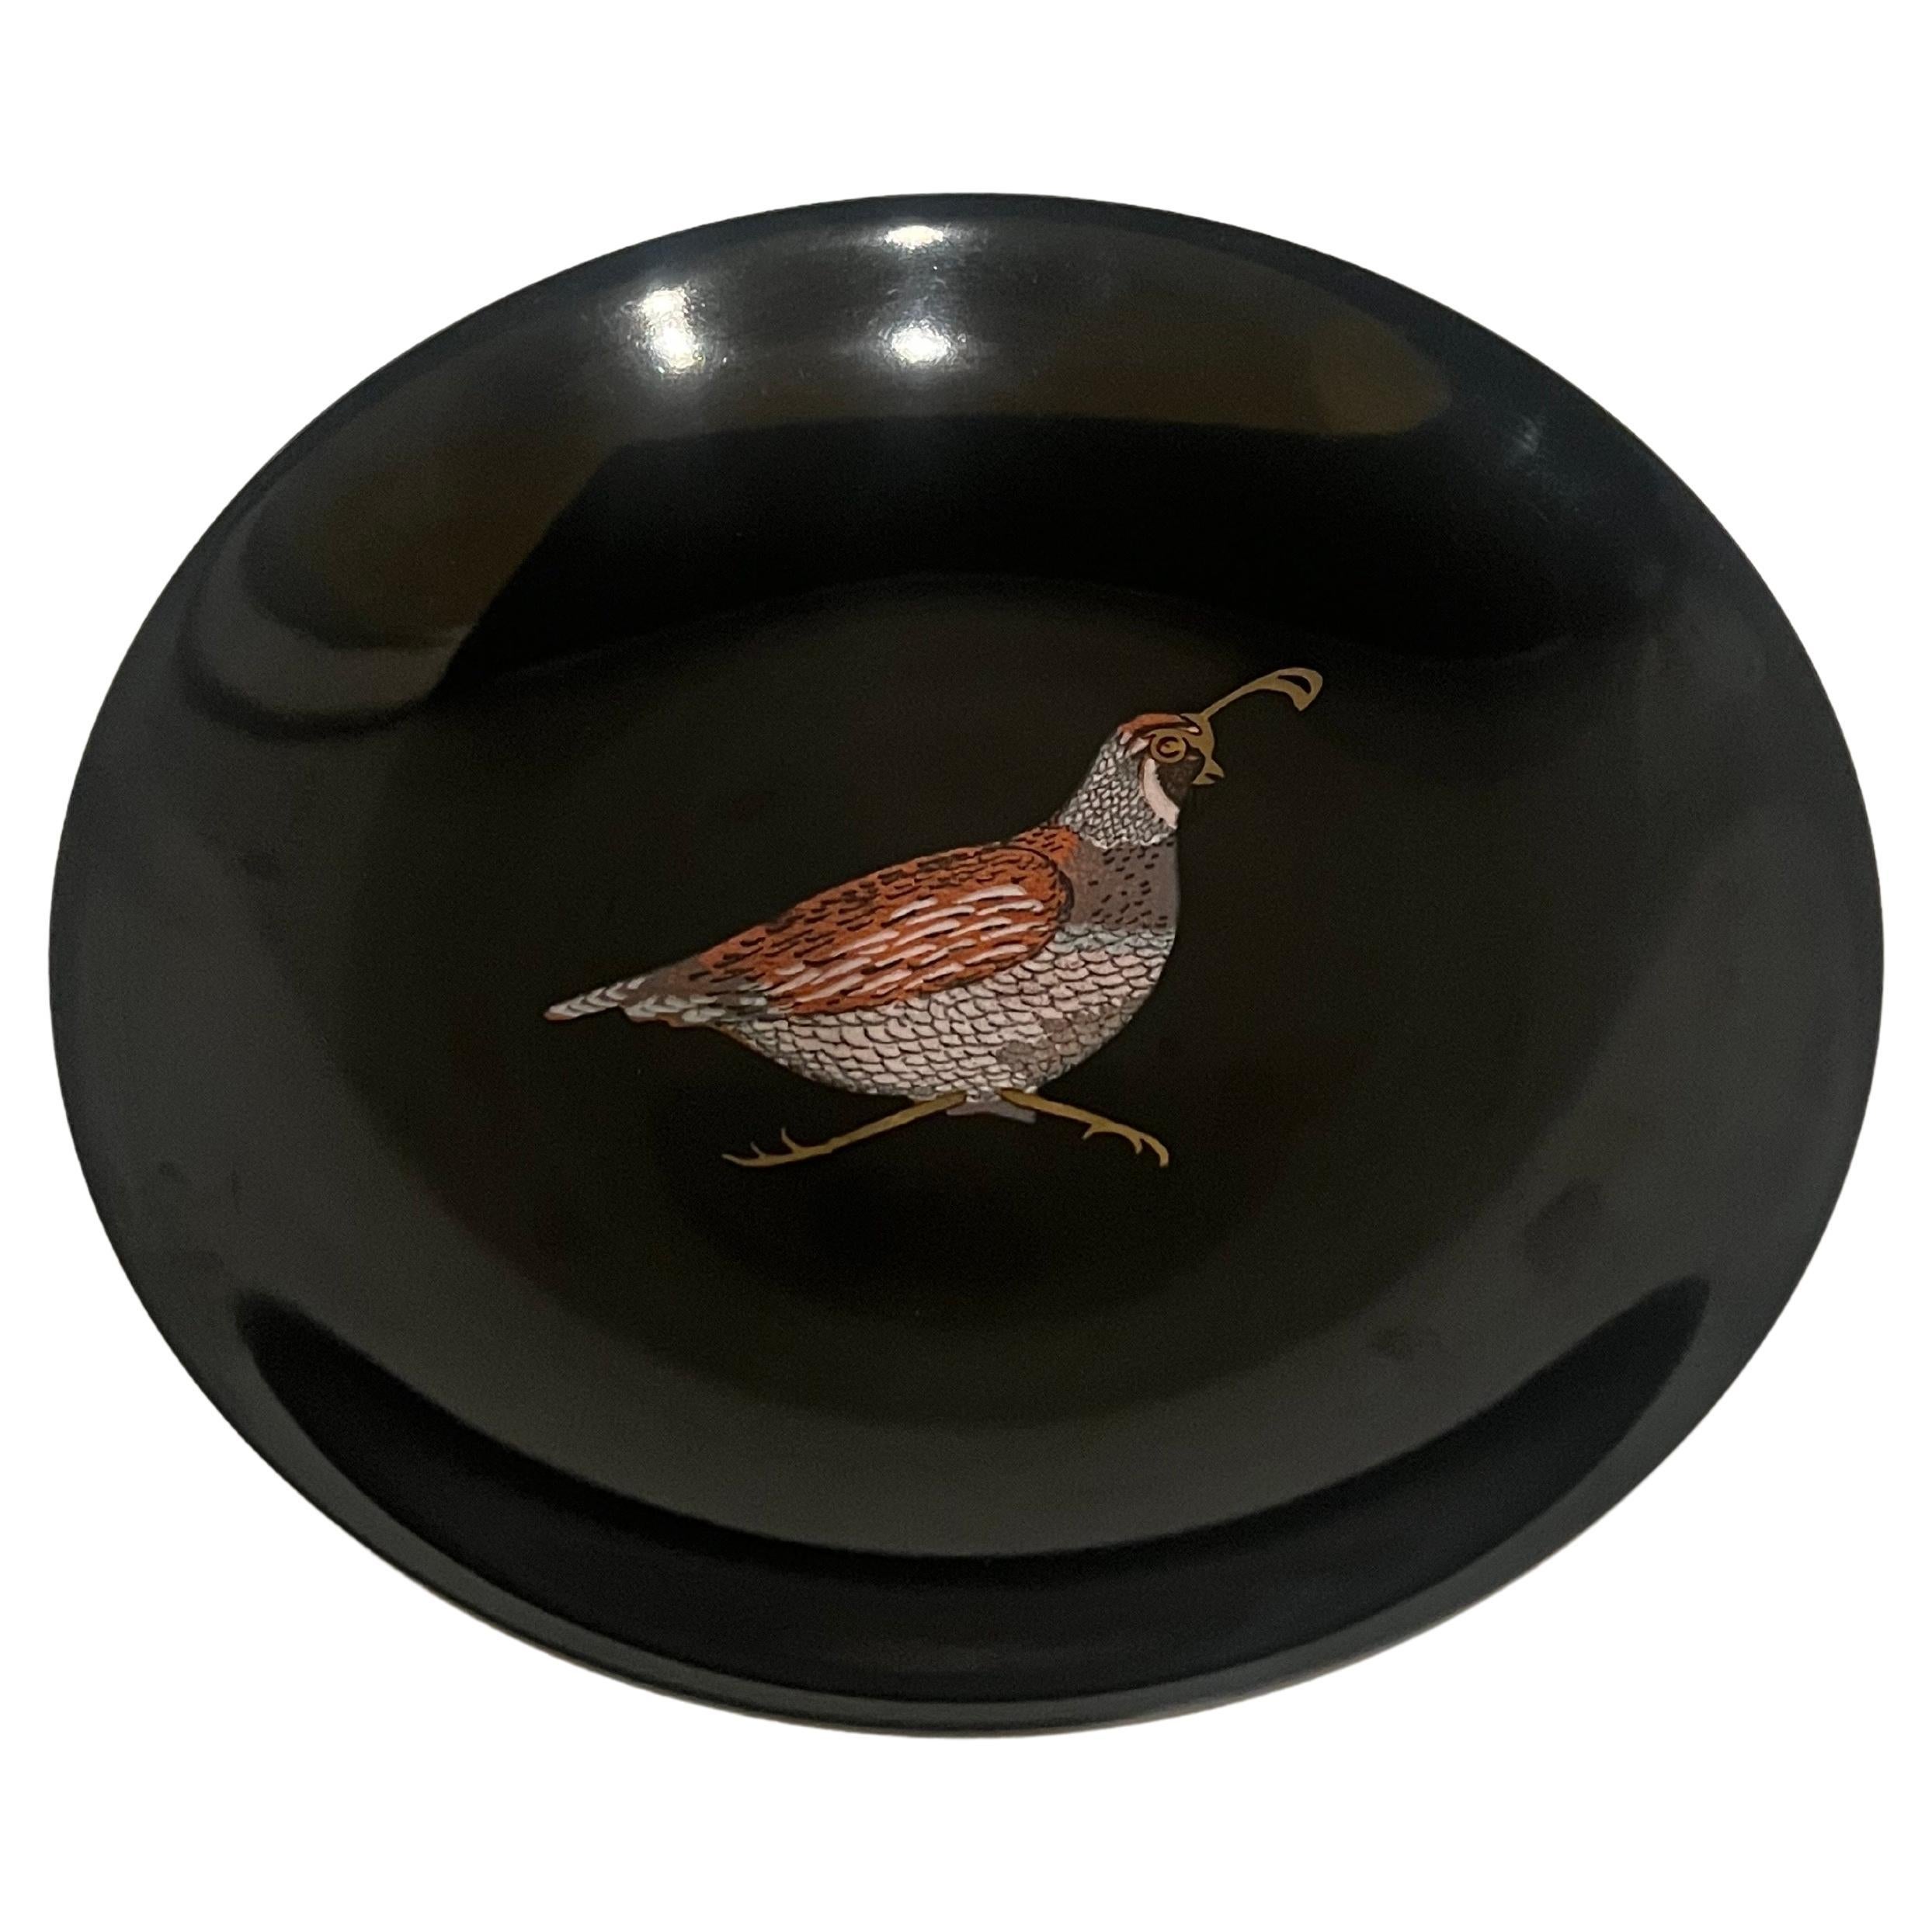 Beautiful Mid Century  Inlaid "Quail" Low Bowl Catch It All by Couroc California